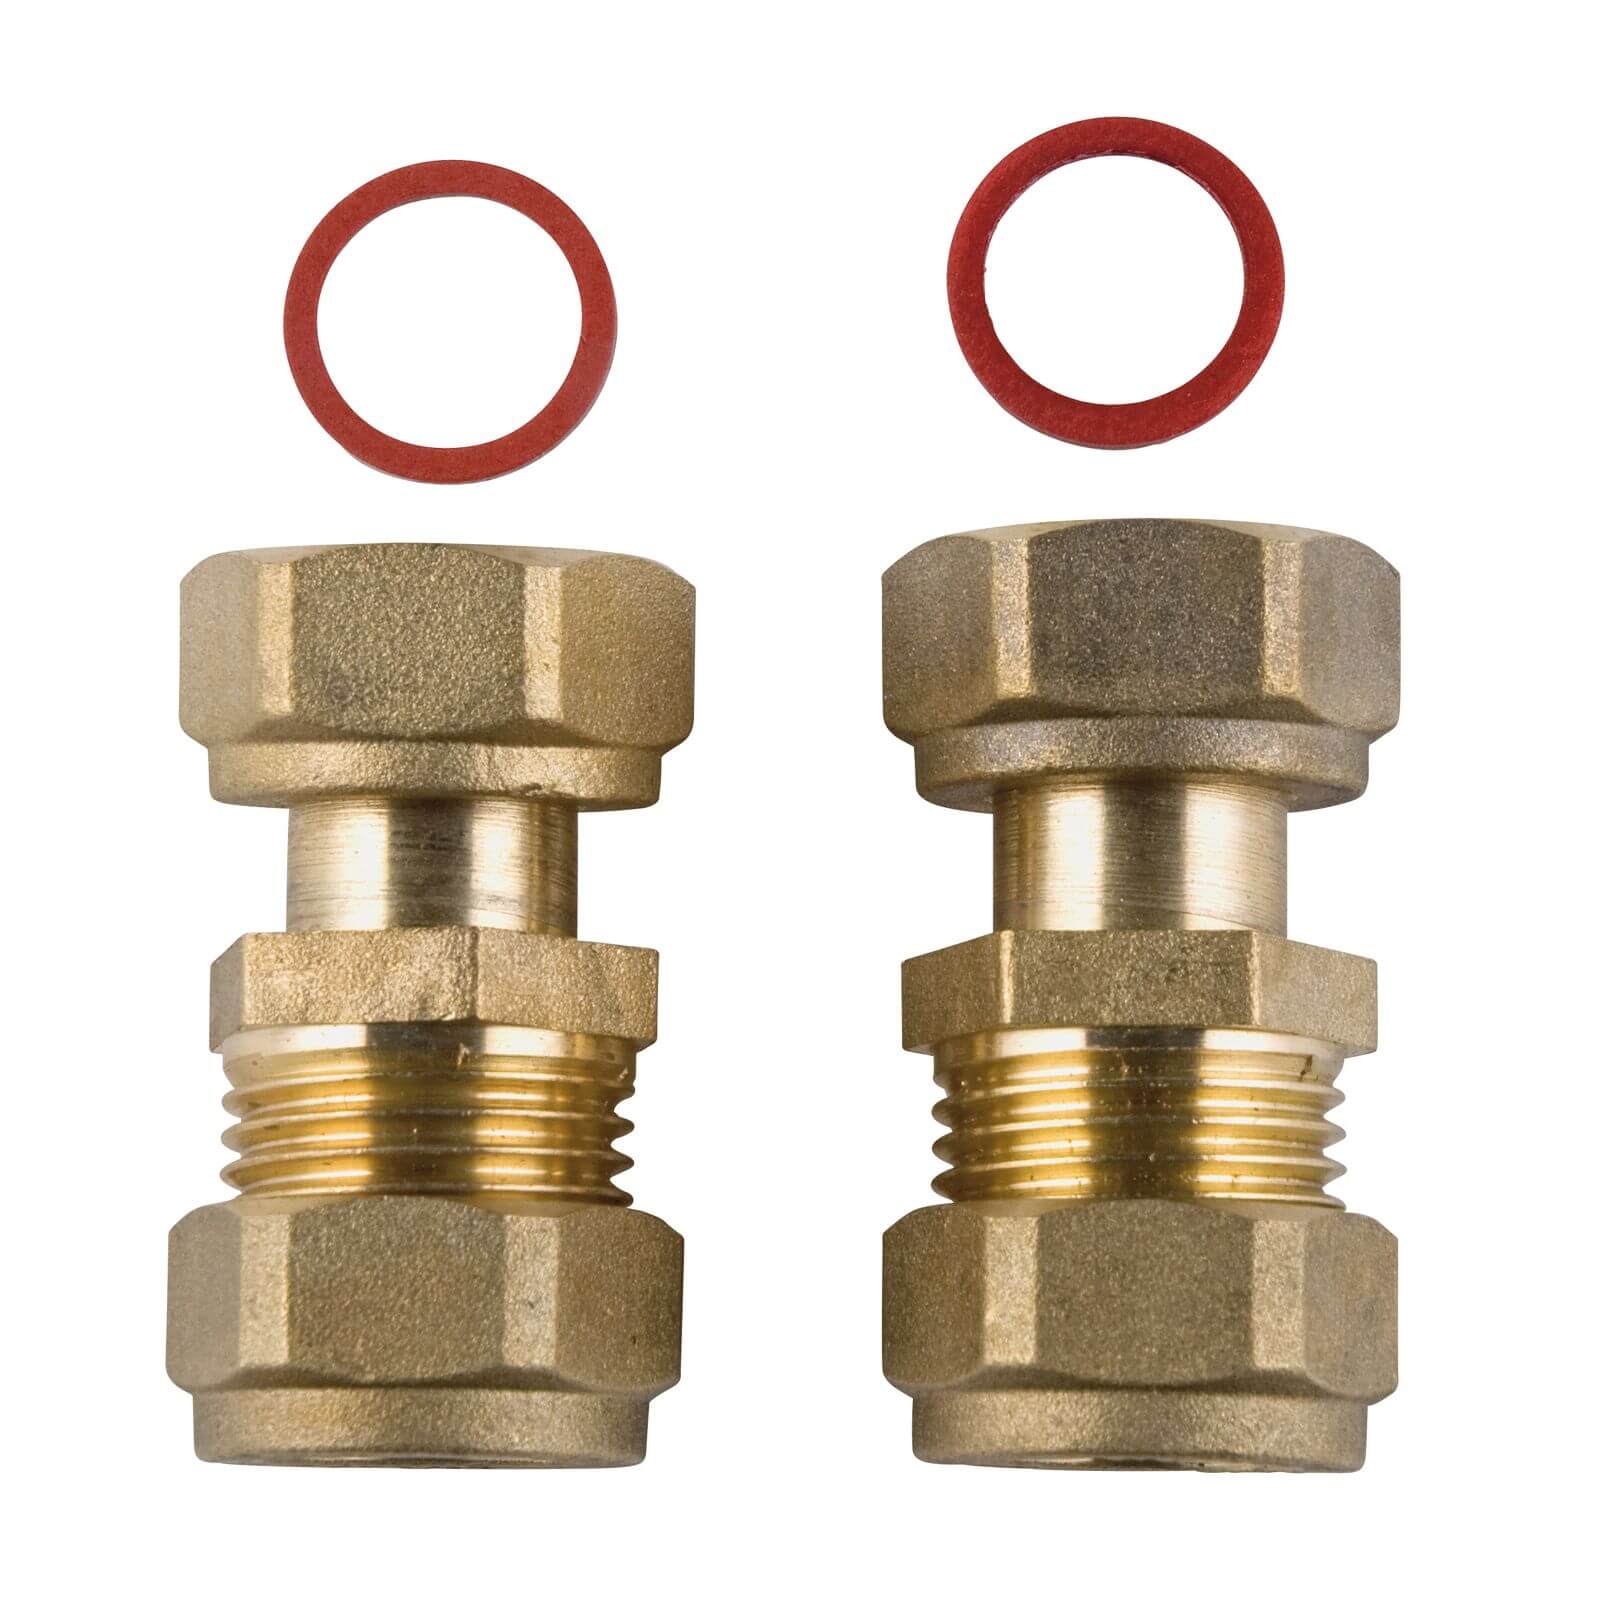 Compression Tap Connector - Brass - 15mm - 0.5in - 2 Pack